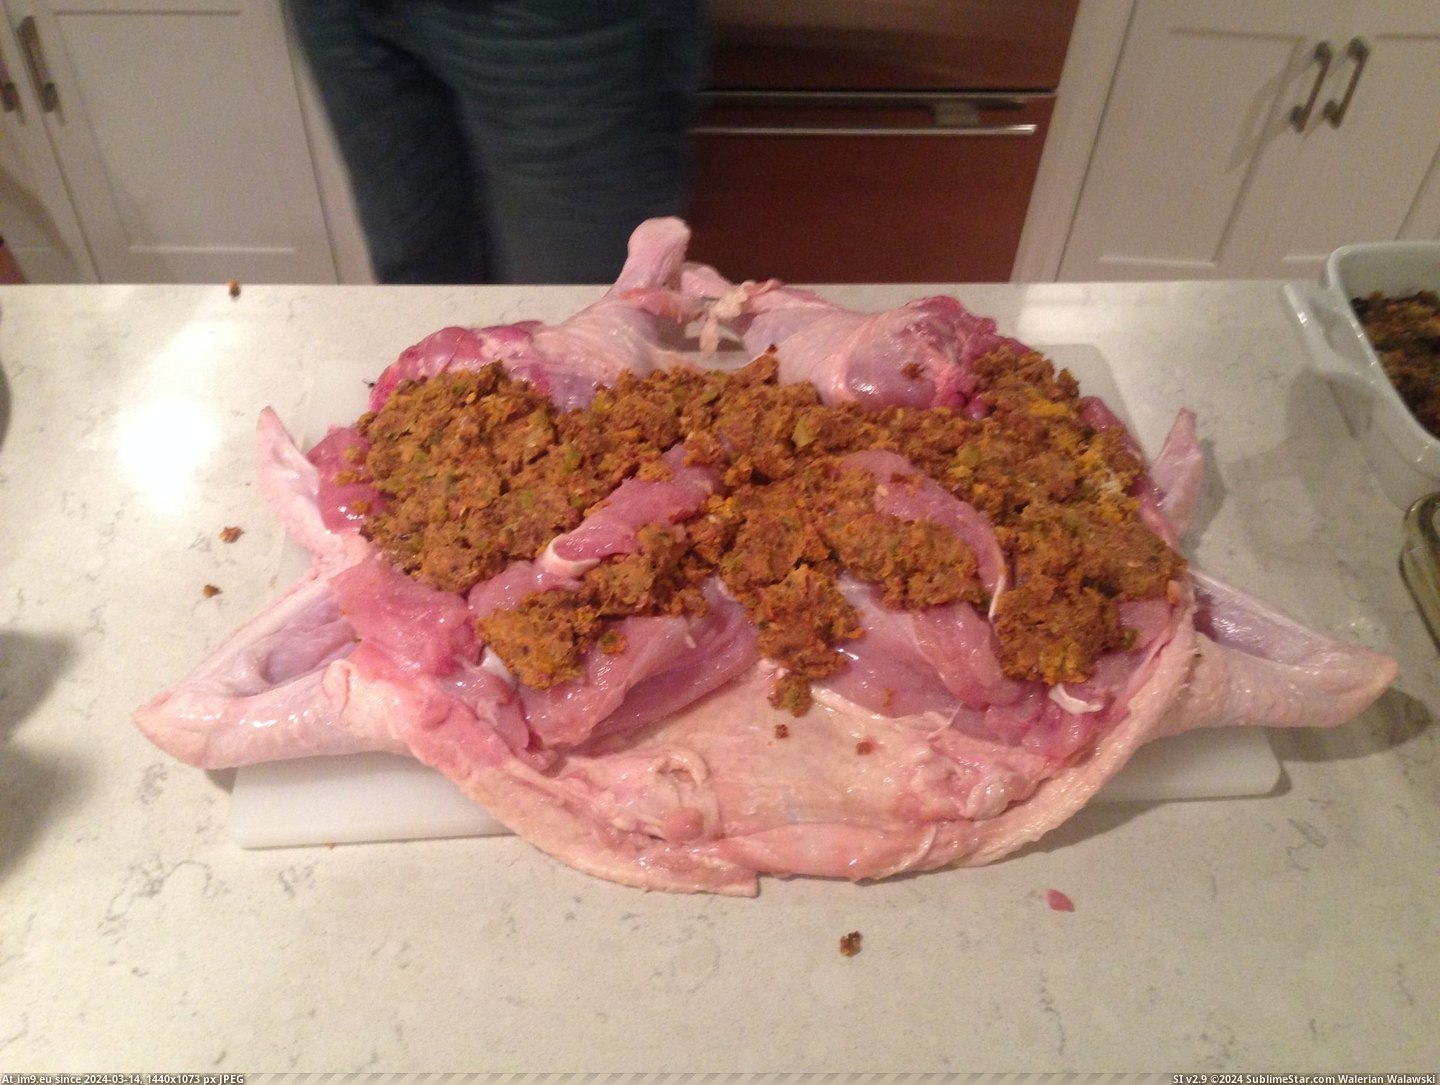 #For #Year #Thought #Thanksgiving #Duck #Turkey #Turducken #Family #See #Chicken [Pics] My family makes turducken (a chicken in a duck in a turkey) every year for Thanksgiving. Thought reddit would like to see Pic. (Image of album My r/PICS favs))